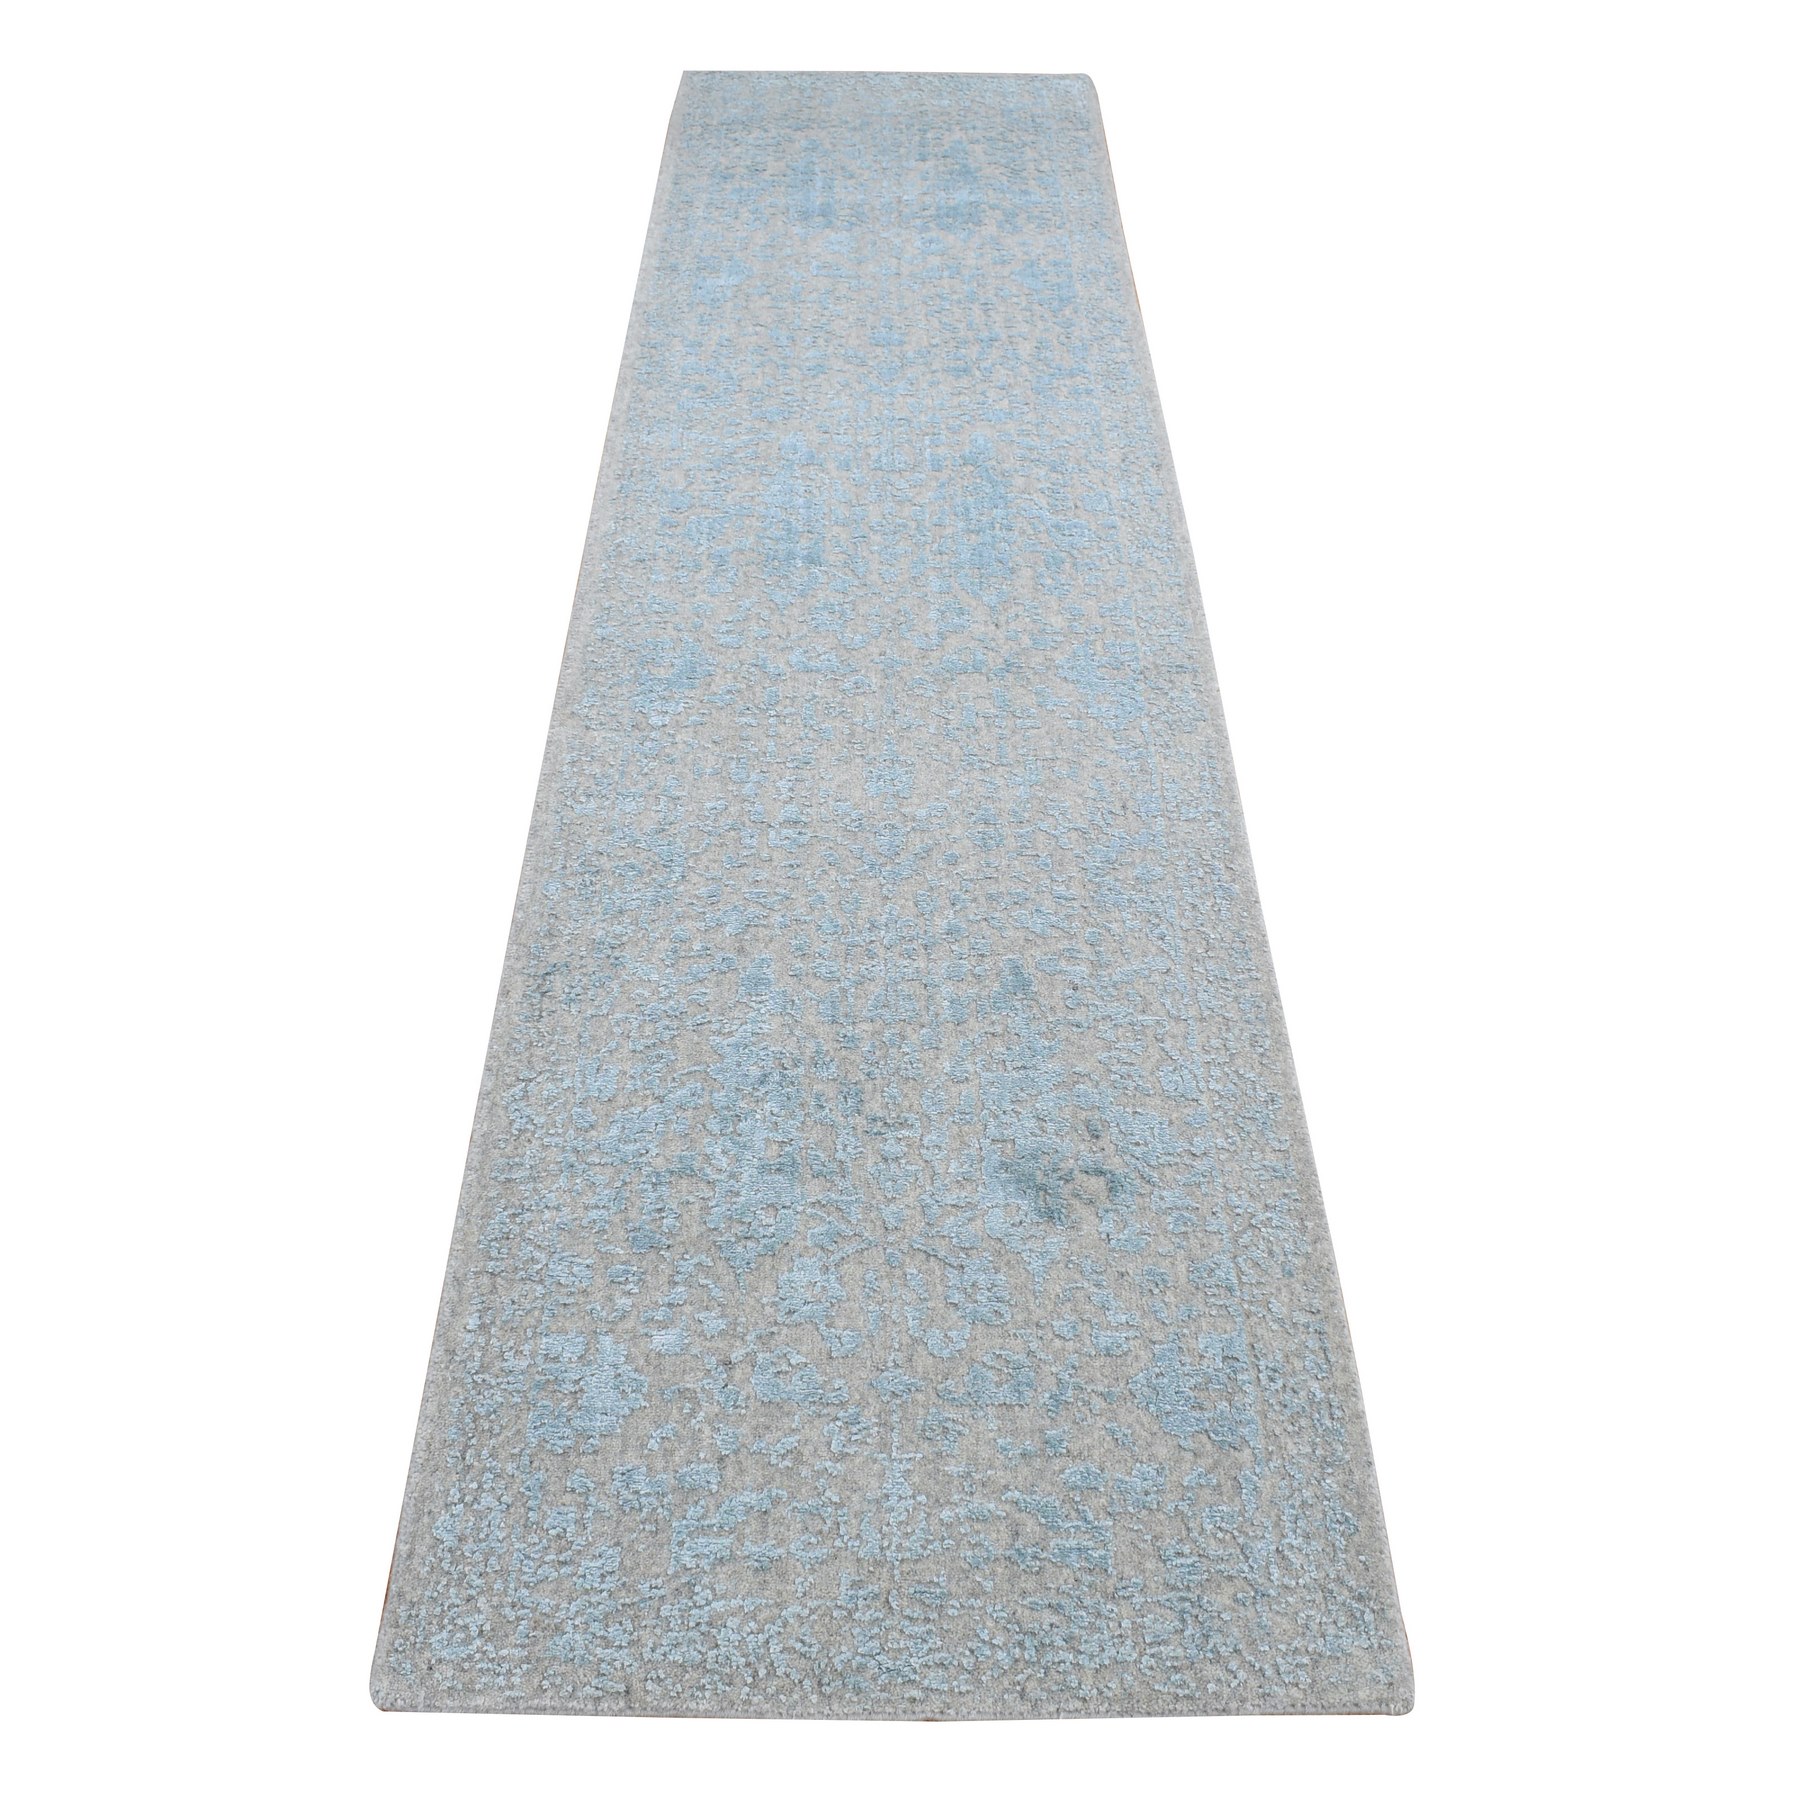 Wool and Silk Rugs LUV785331